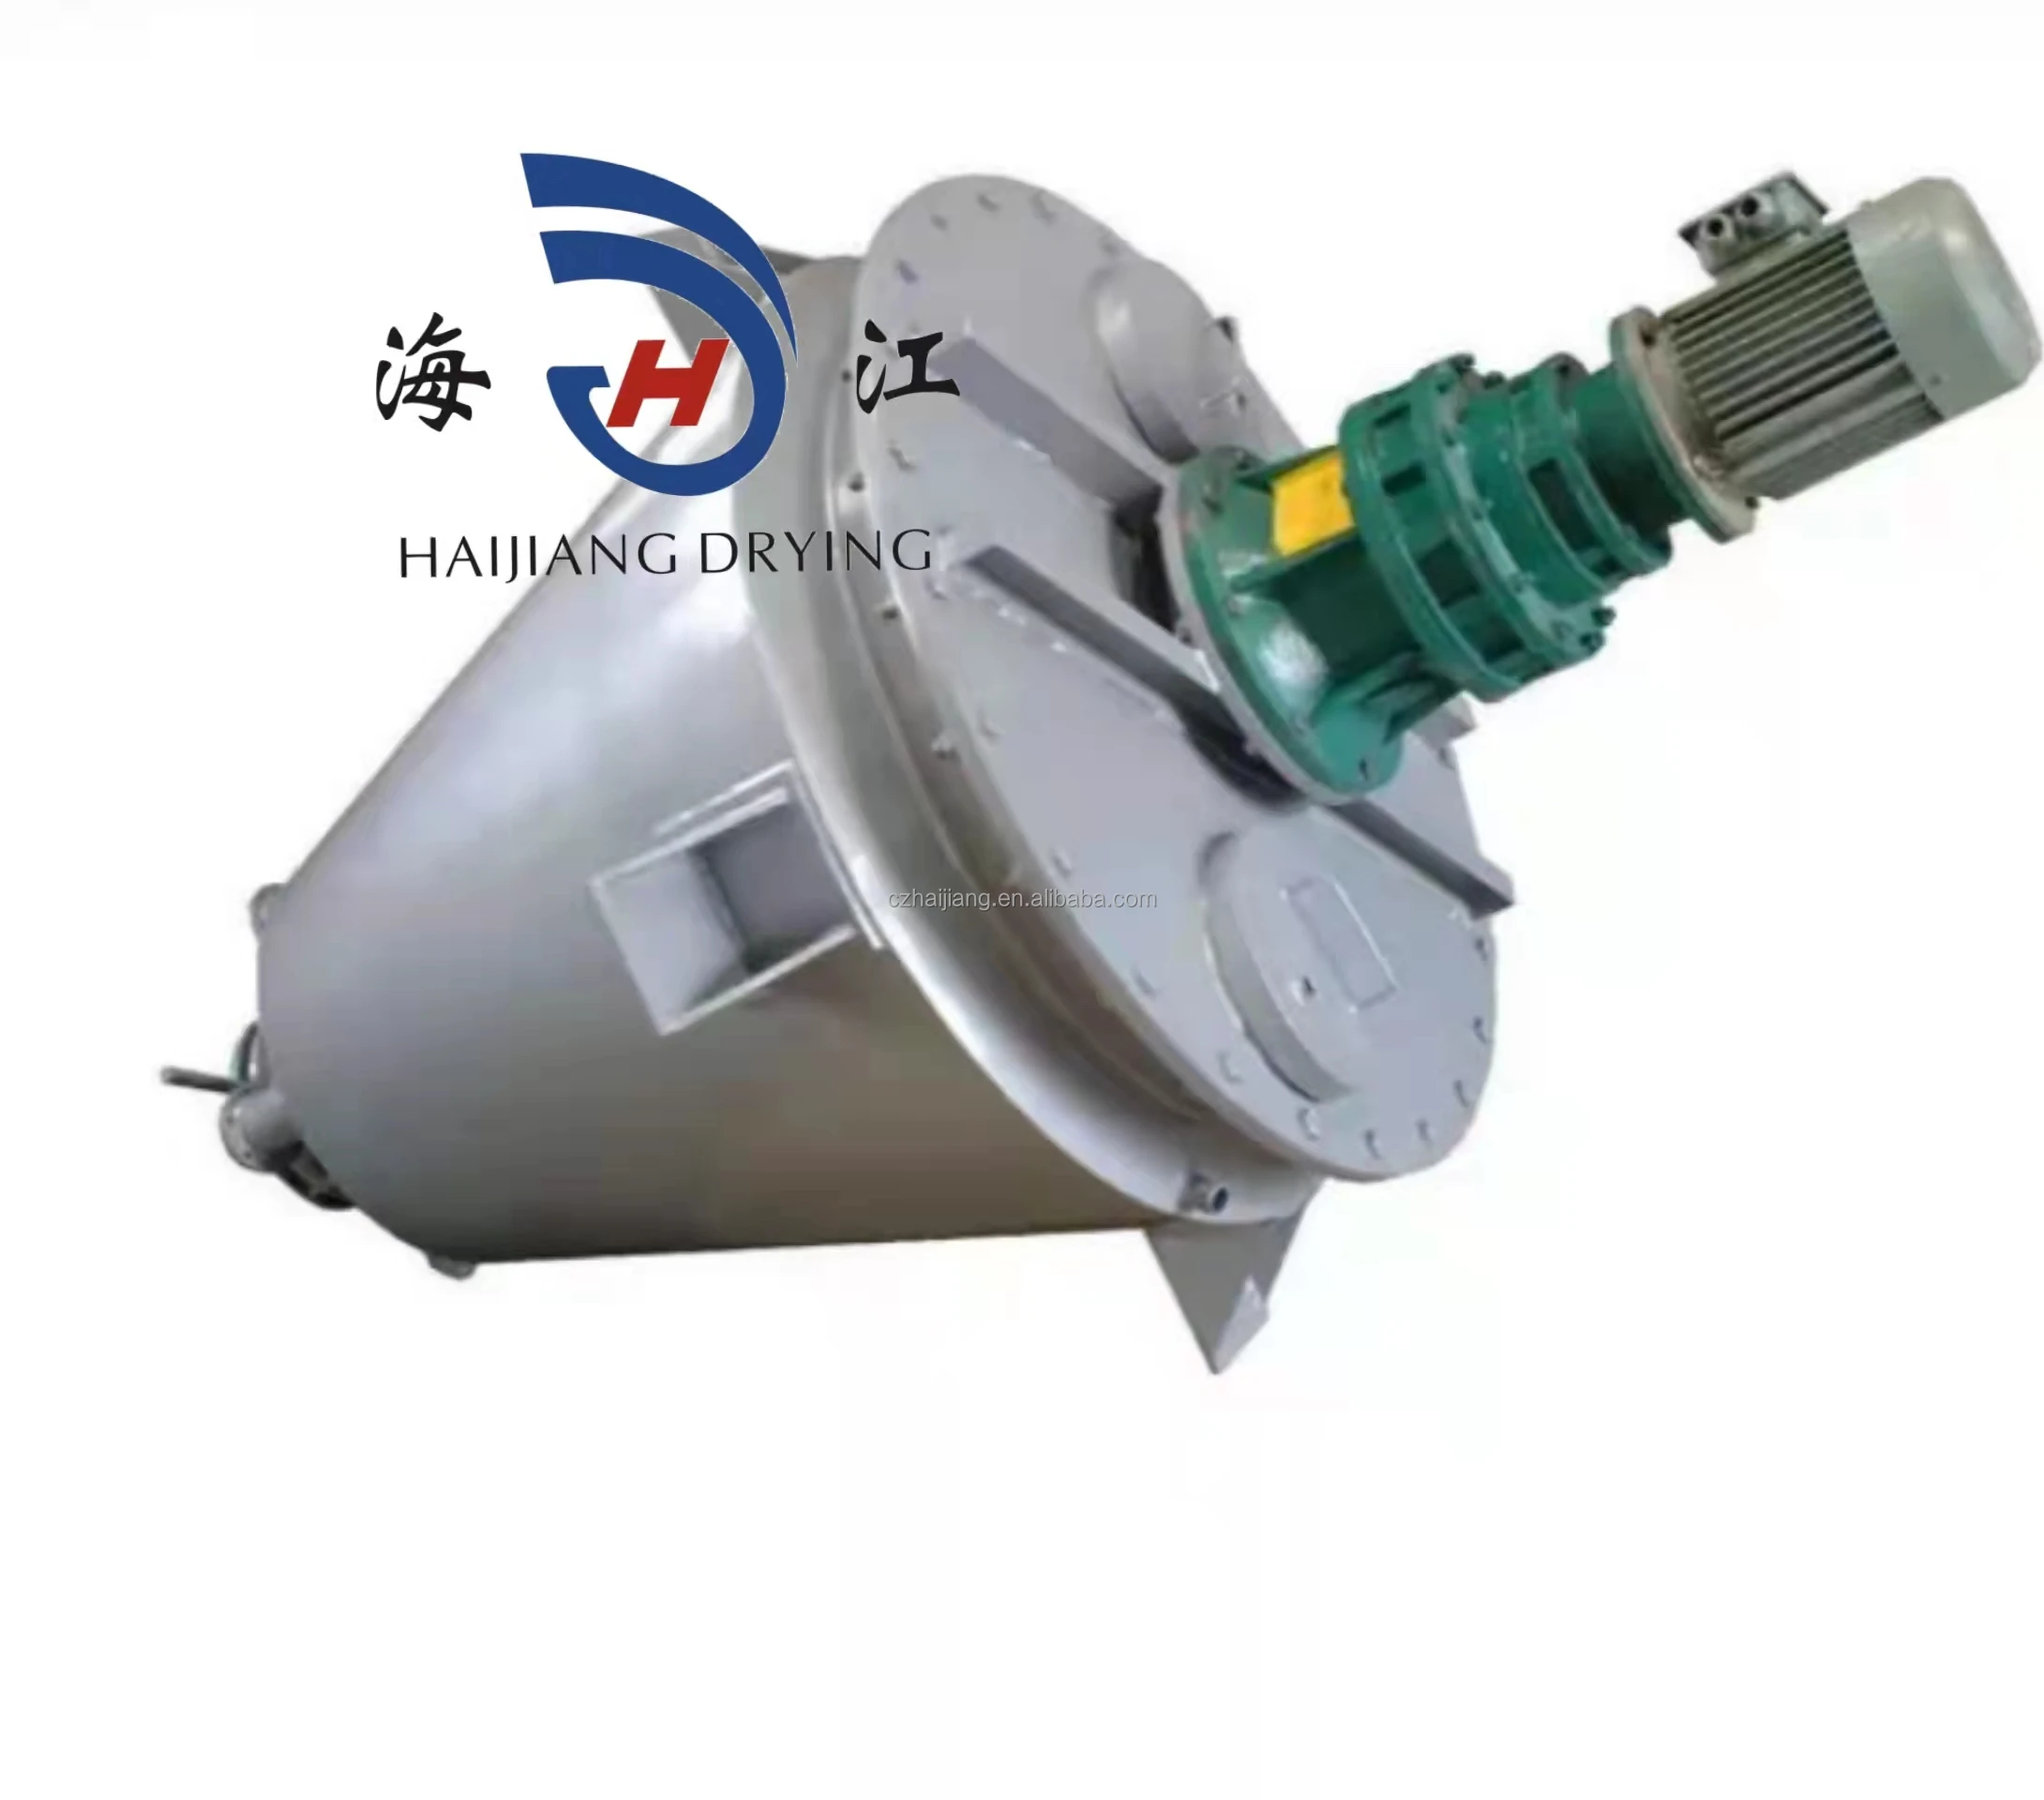 China Manufacture DSH Industrial Metal Powders Double Screw Blender Nauta Conical Mixer